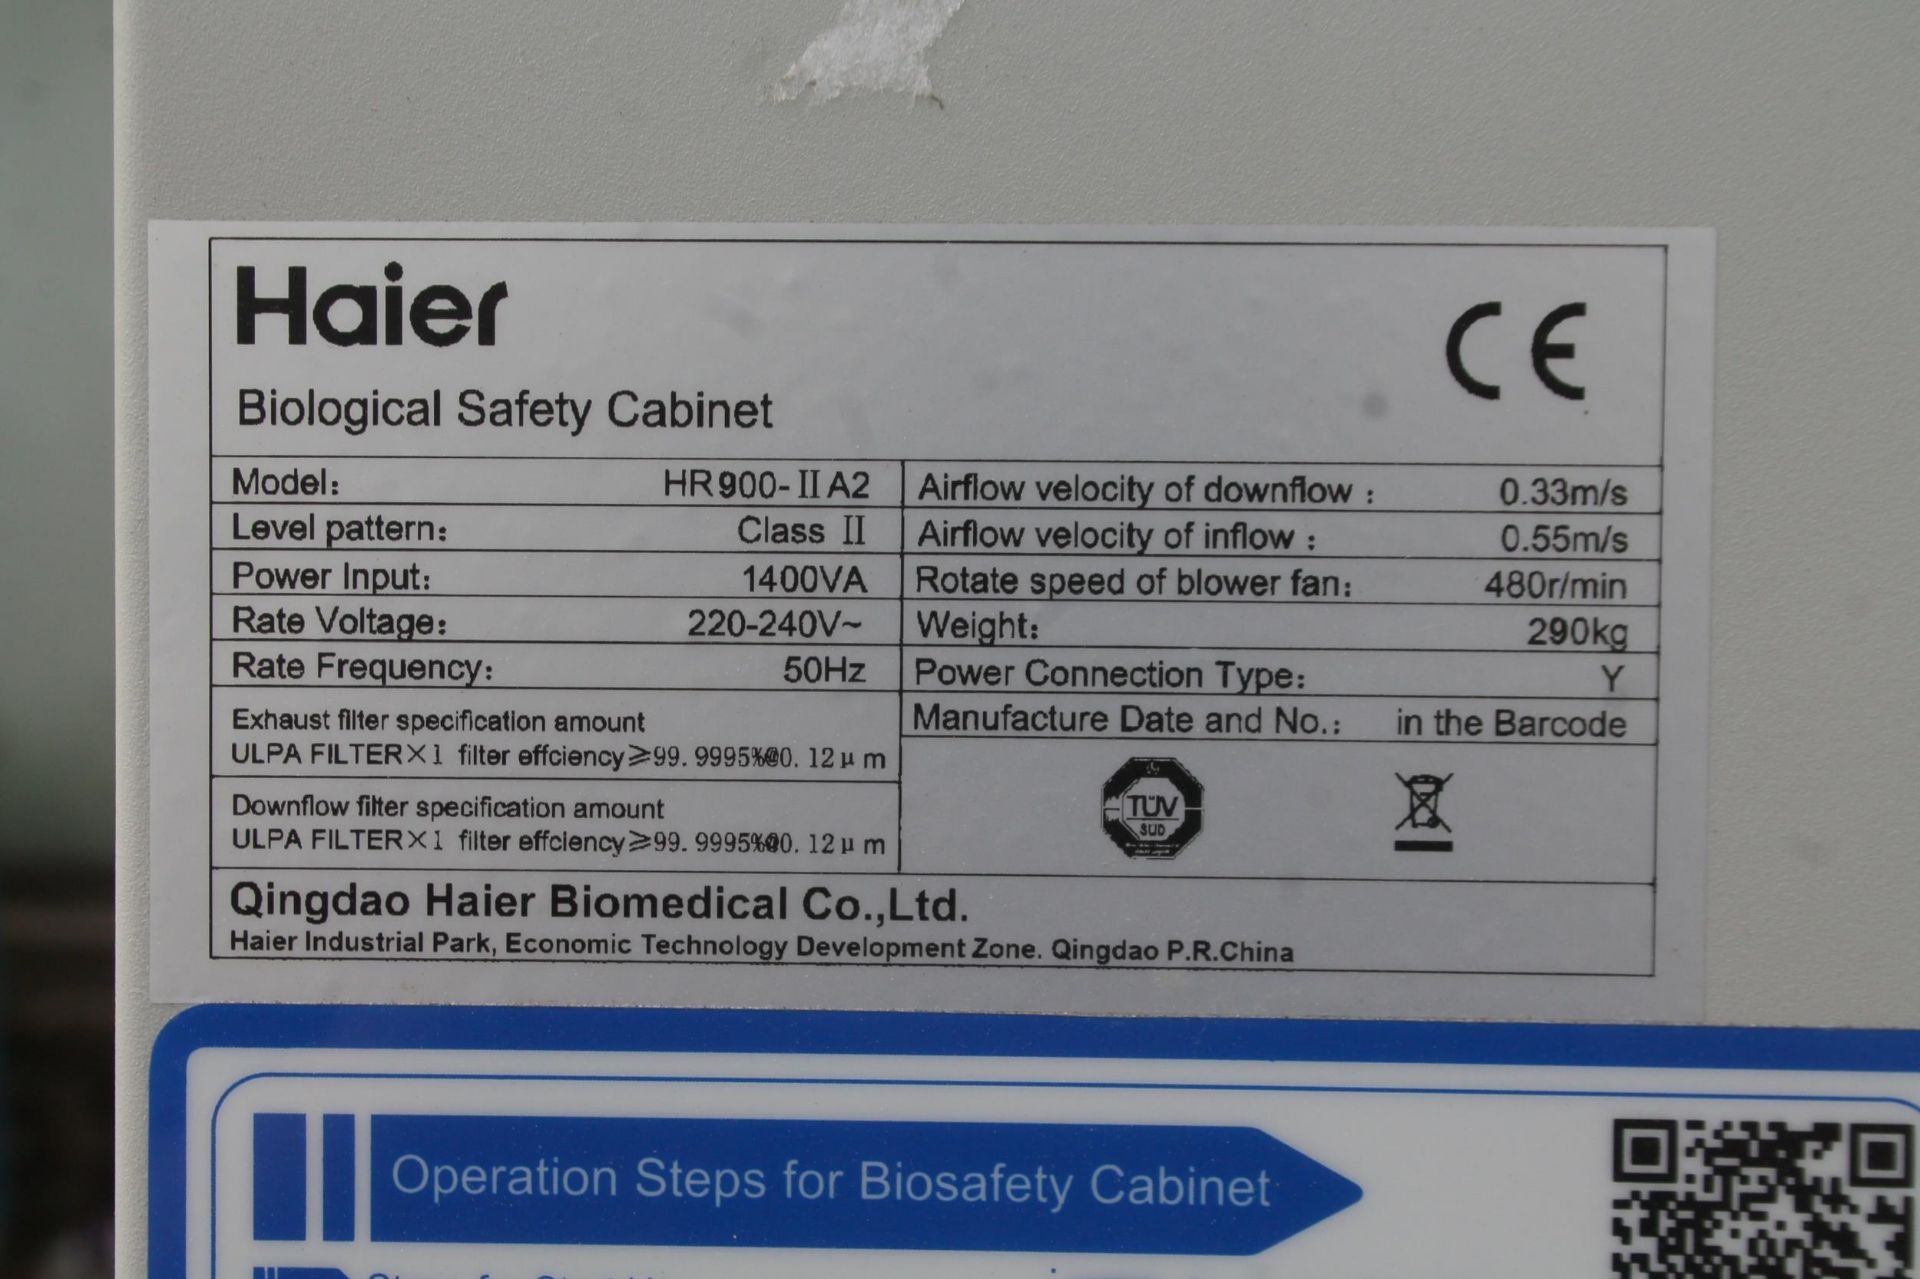 HAIER CLASS II MICROBIOLOGICAL SAFETY CABINET FUME EXTRACTOR. STAINLESS INTERNALS, HEPA FILTRATION - Image 2 of 3